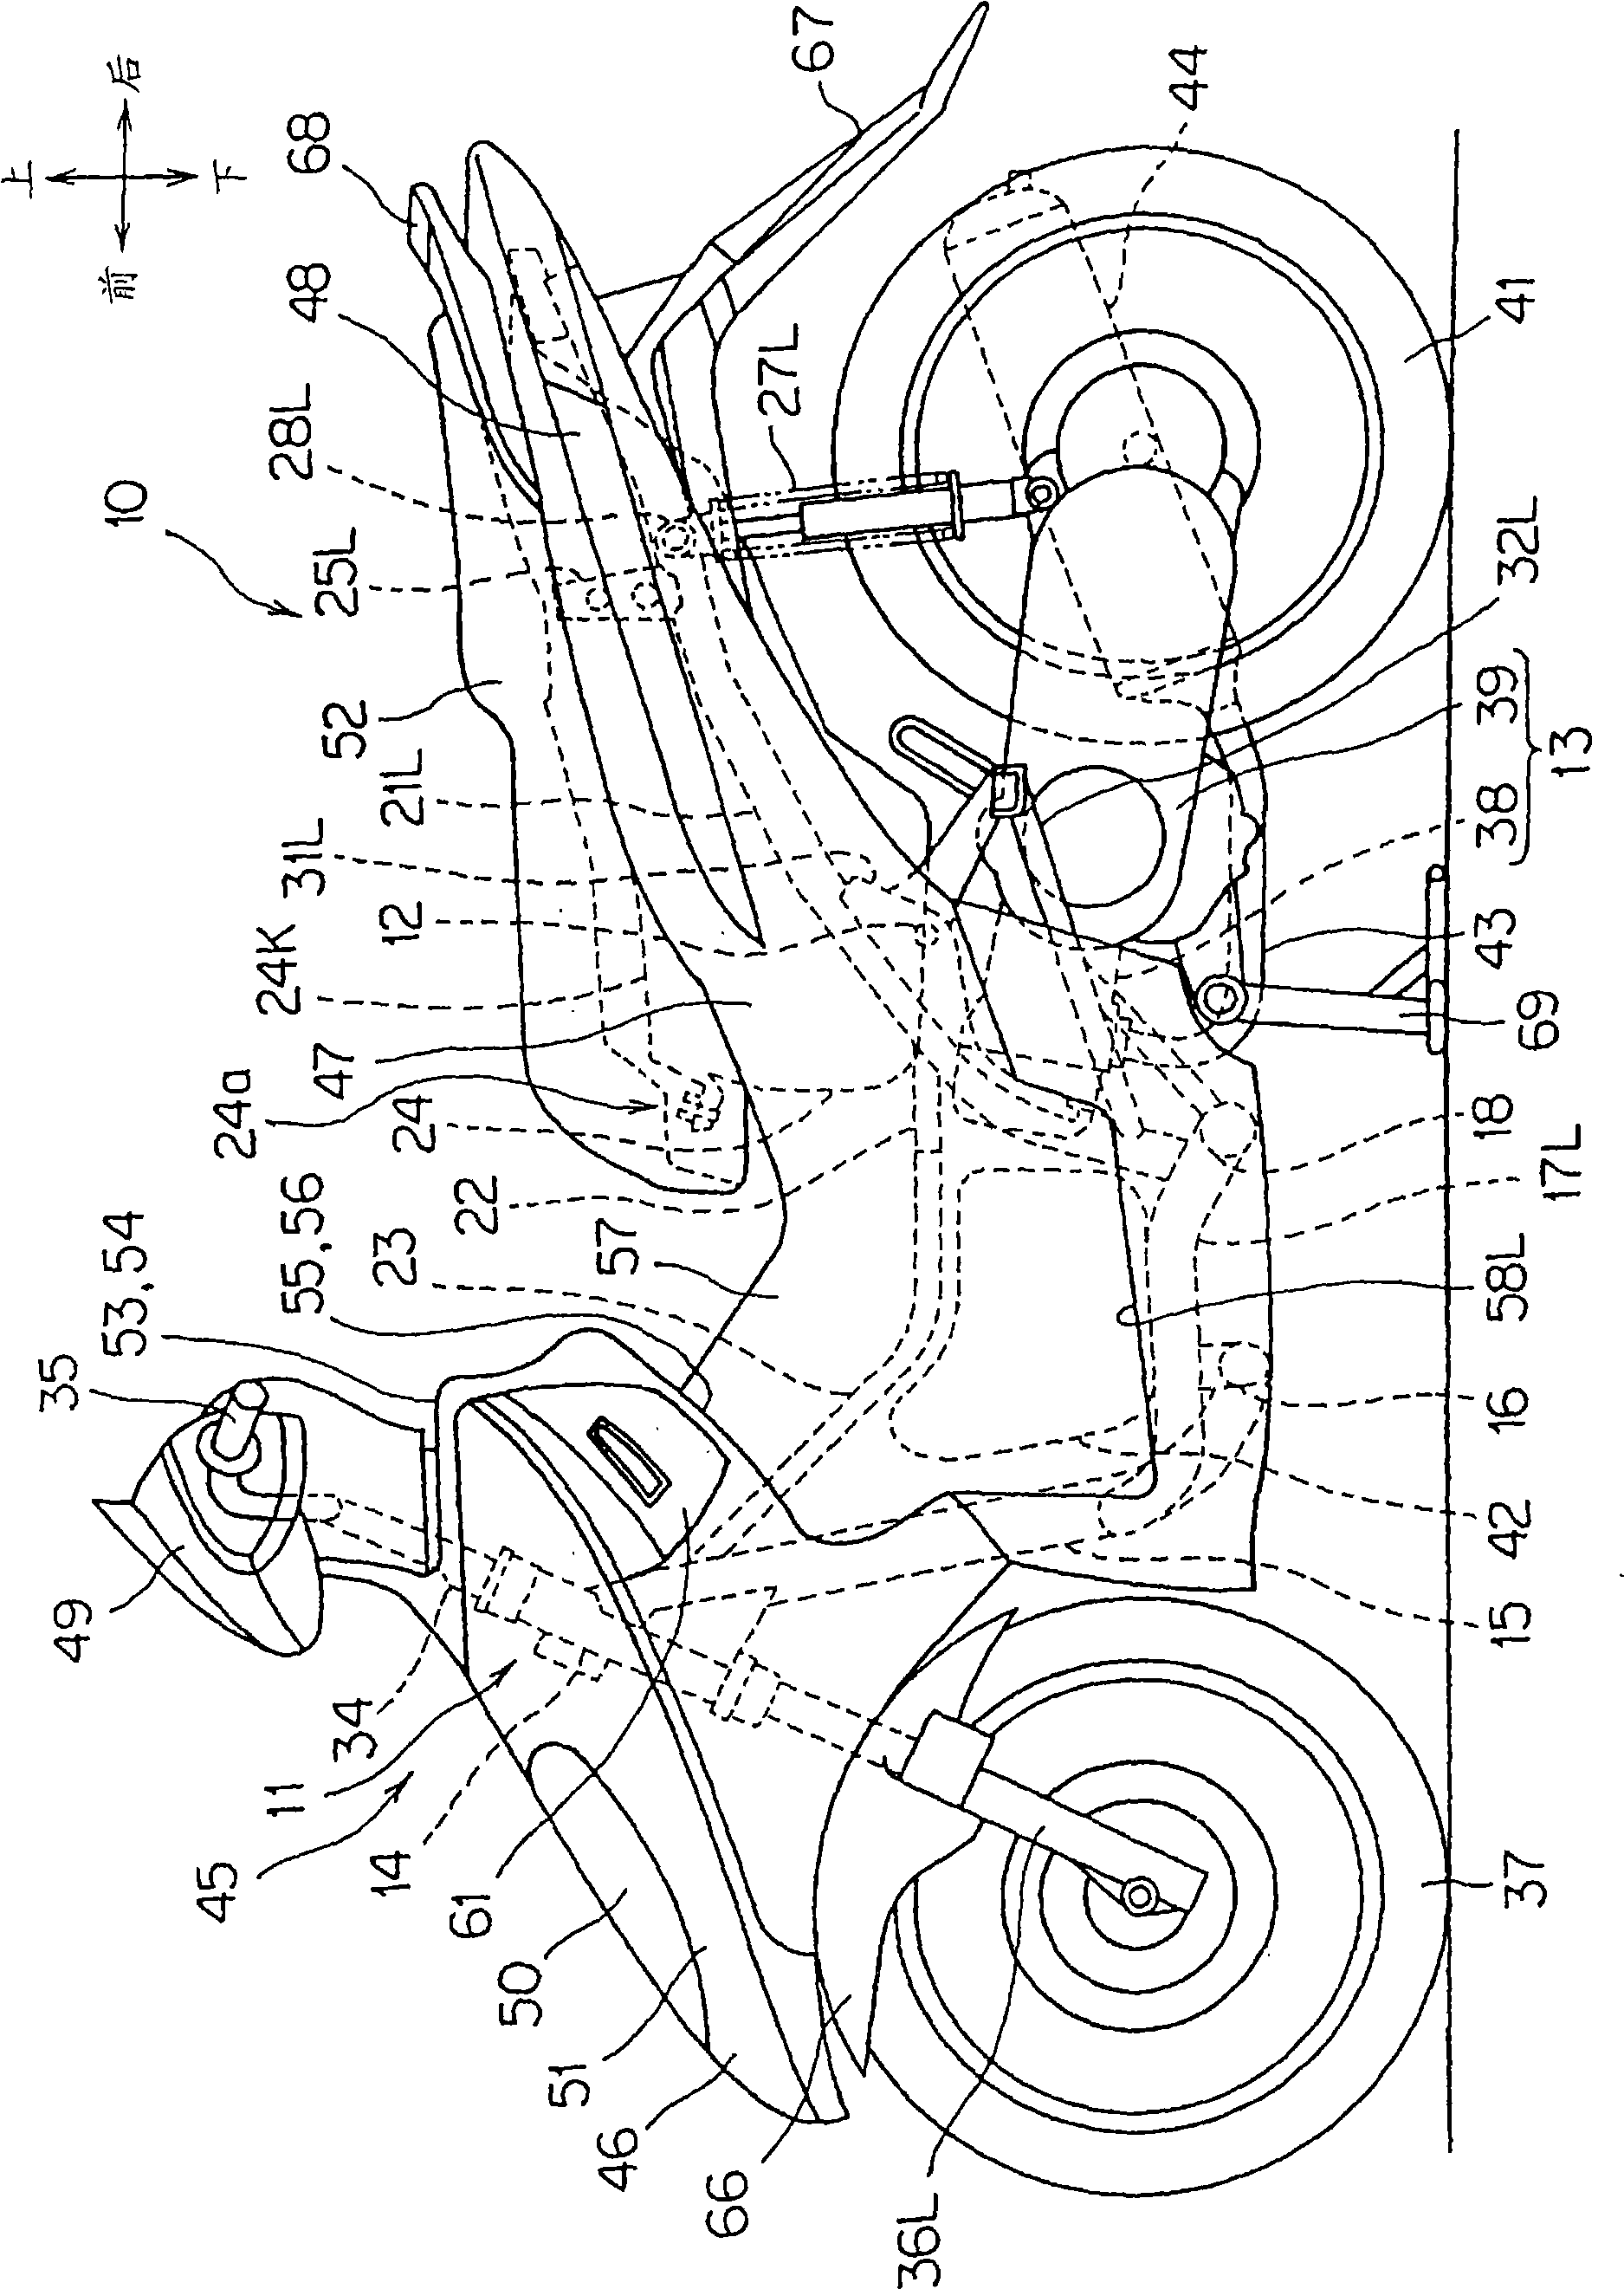 Storage box structure of motor two-wheeler